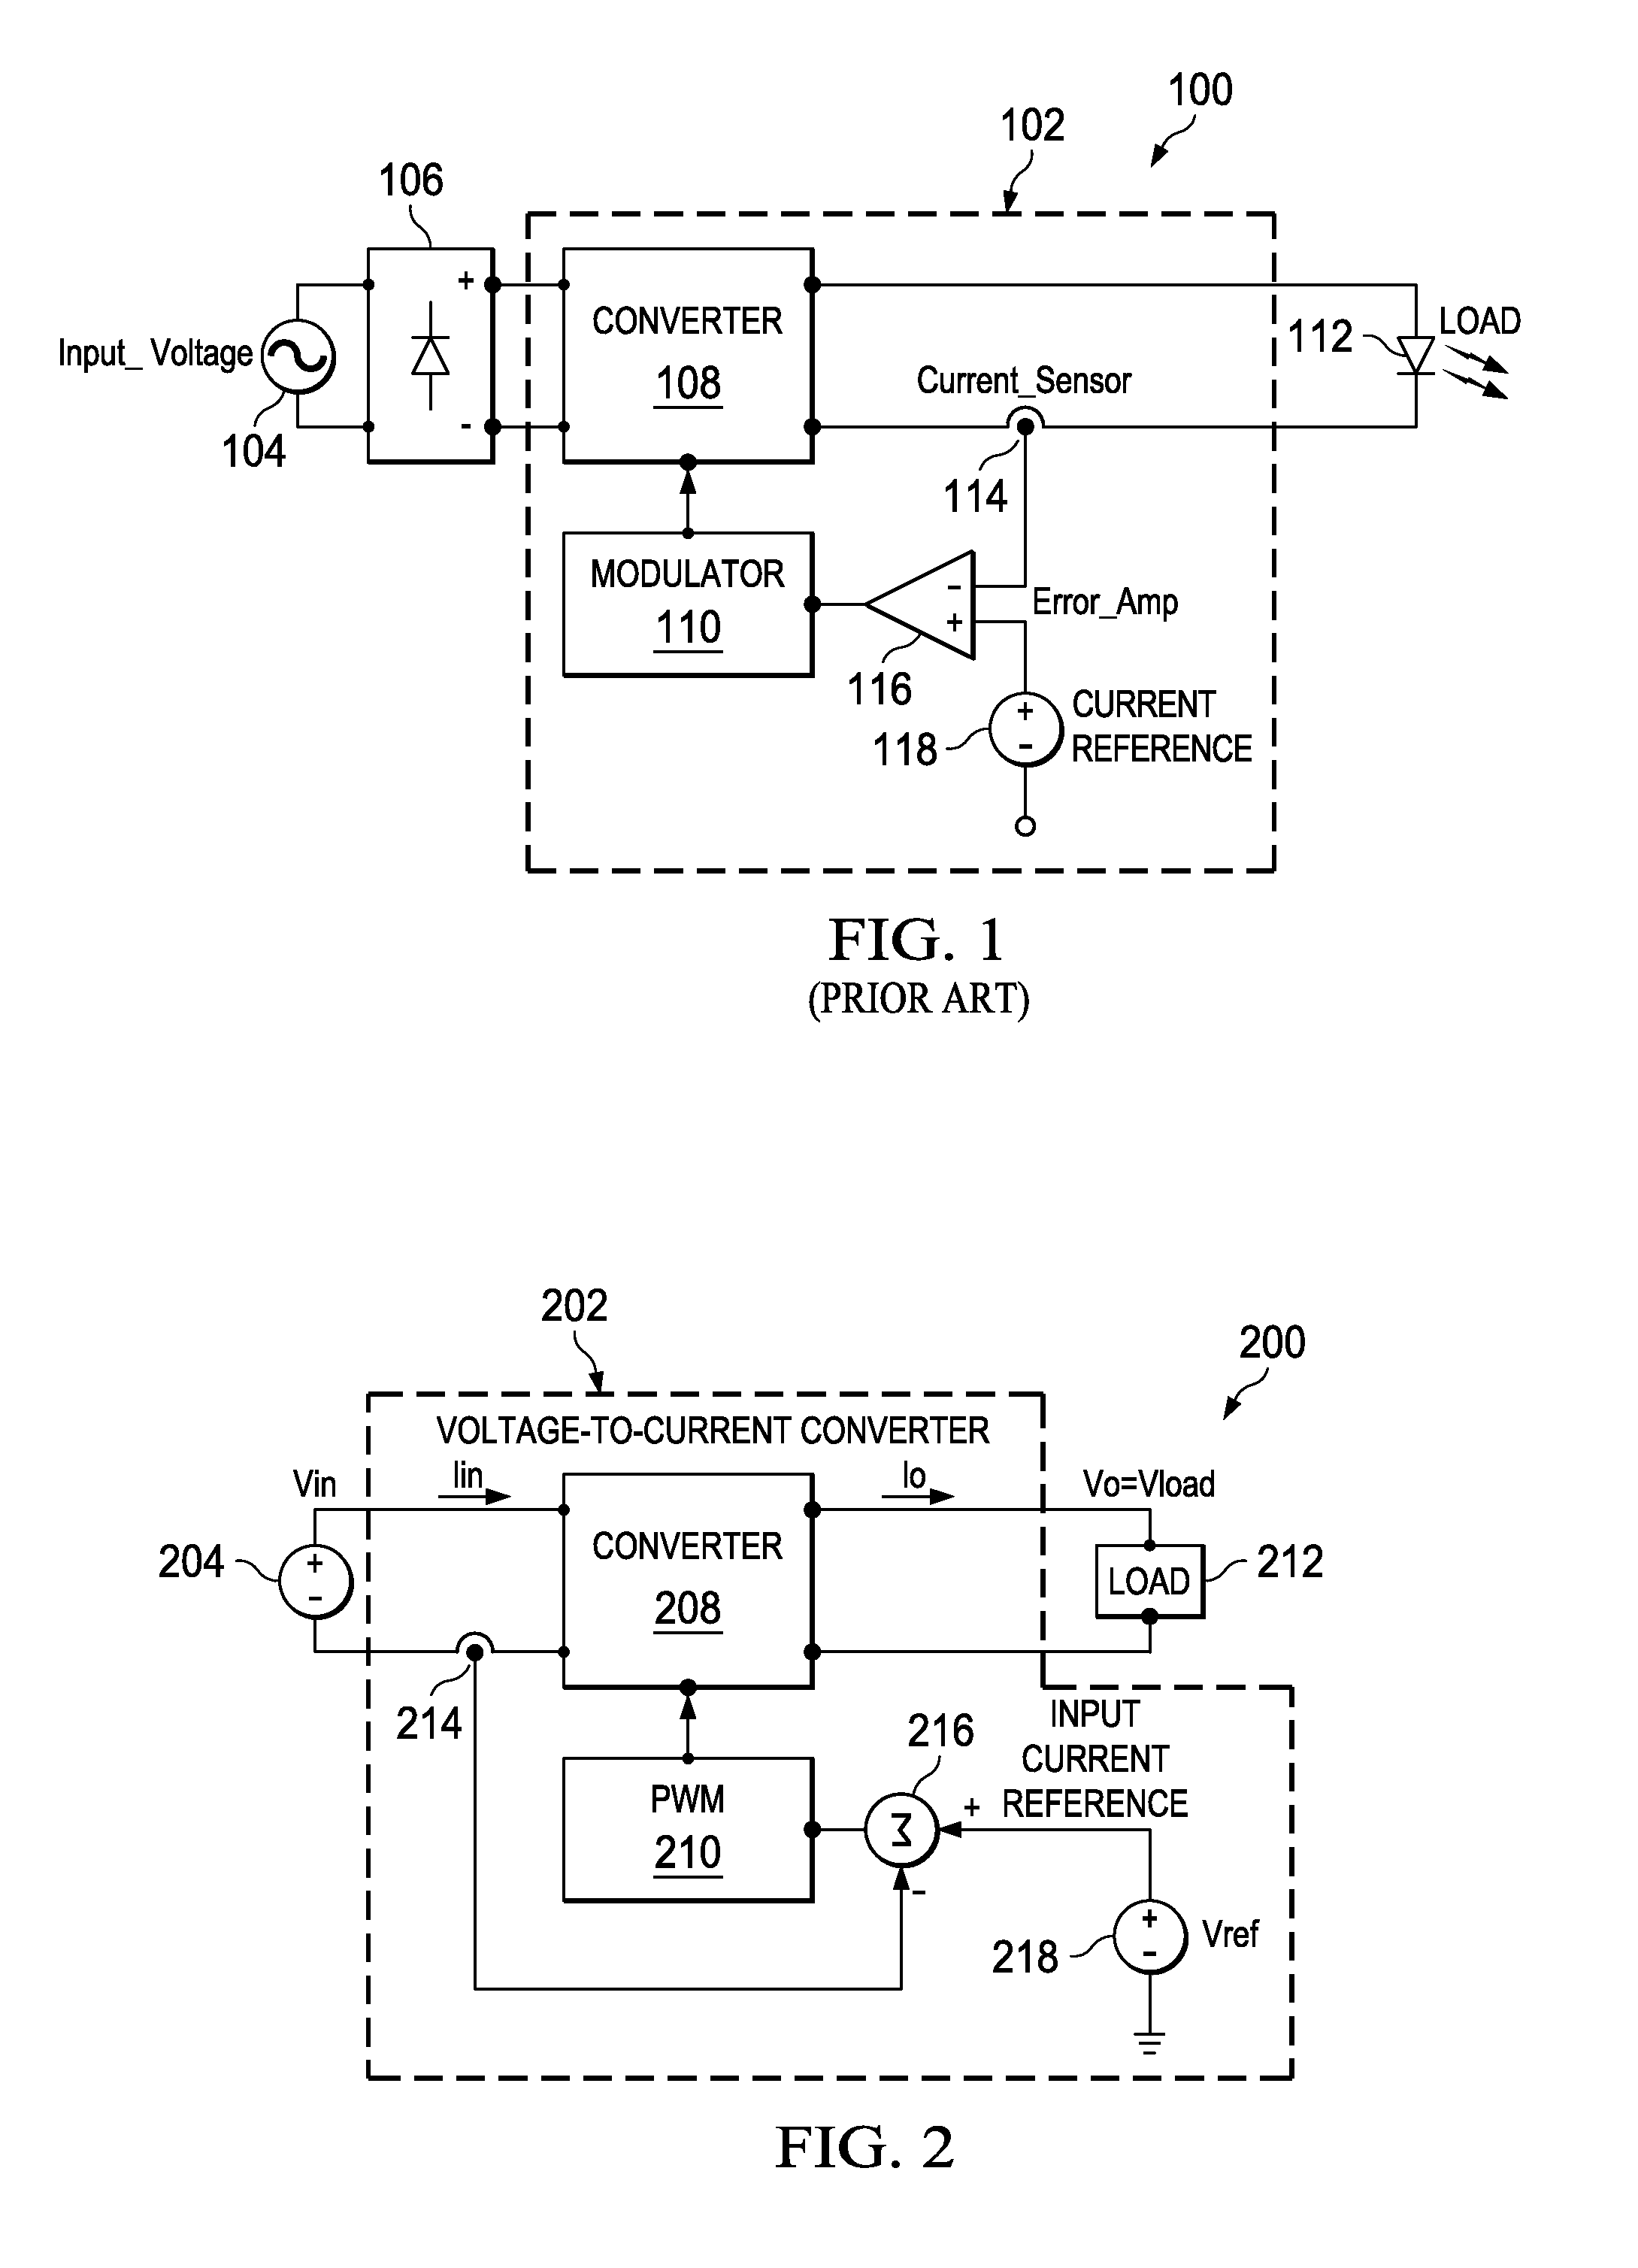 Feed forward controlled voltage to current source for LED driver